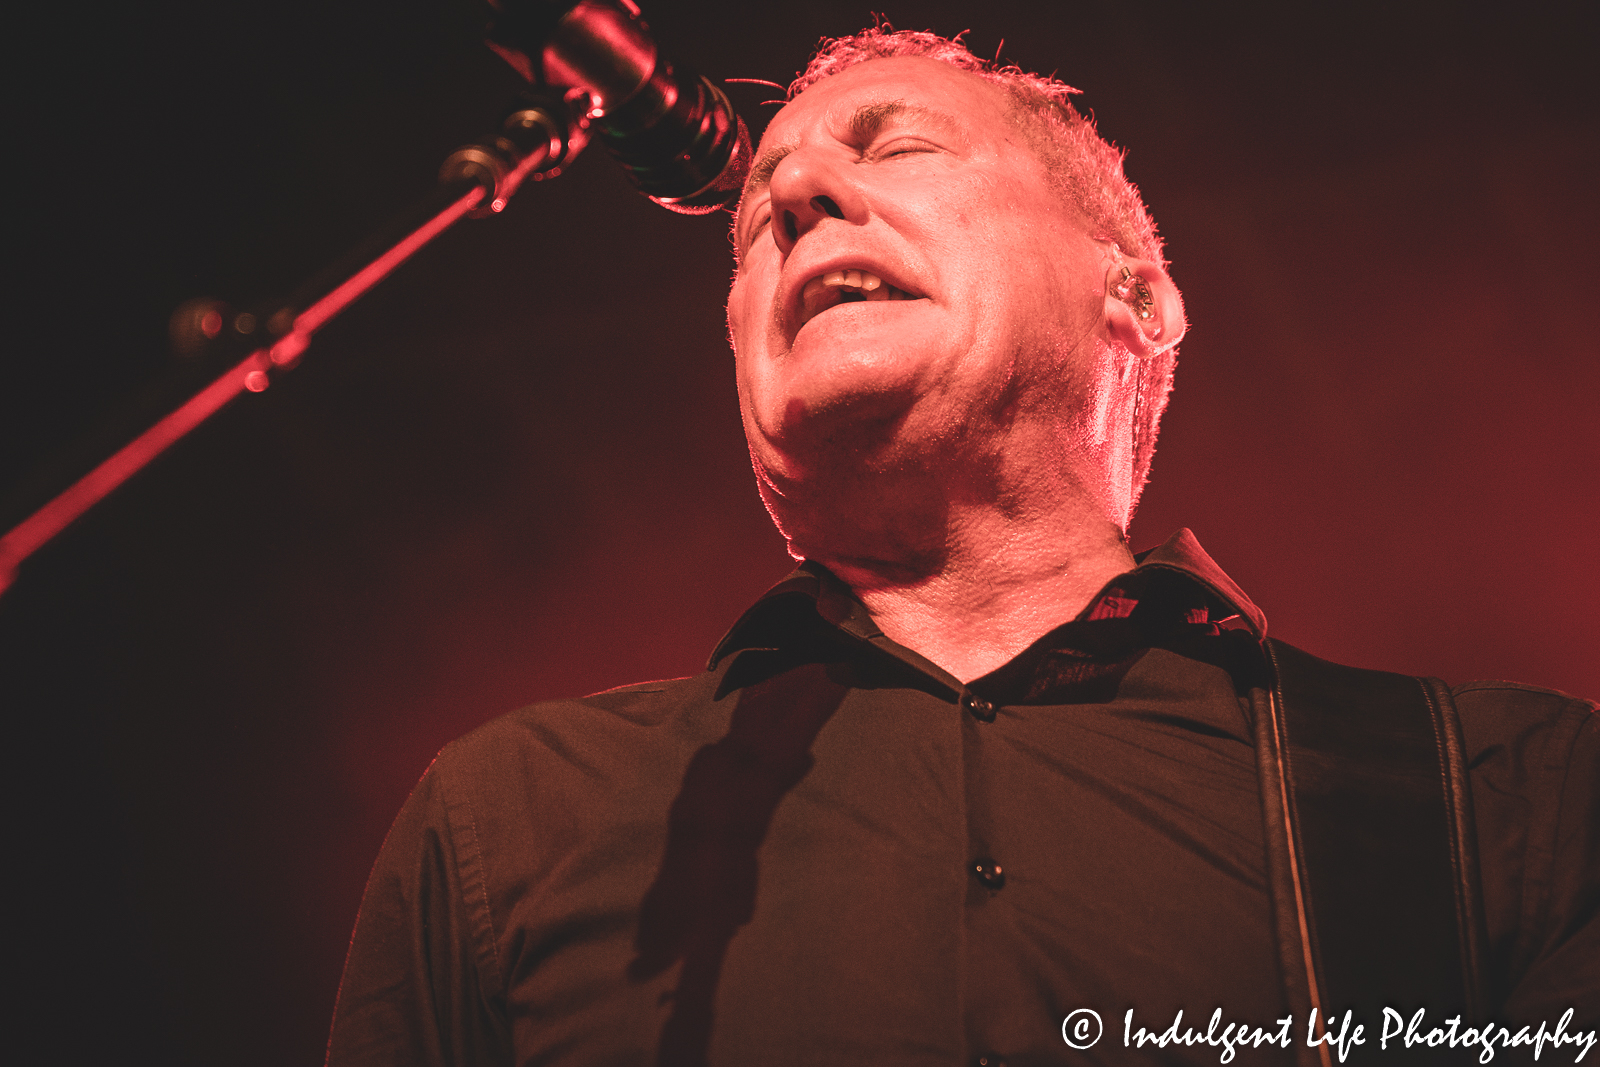 Lead singer and bass player Andy McCluskey of OMD singing live at The Truman in downtown Kansas City, MO on May 8, 2022.